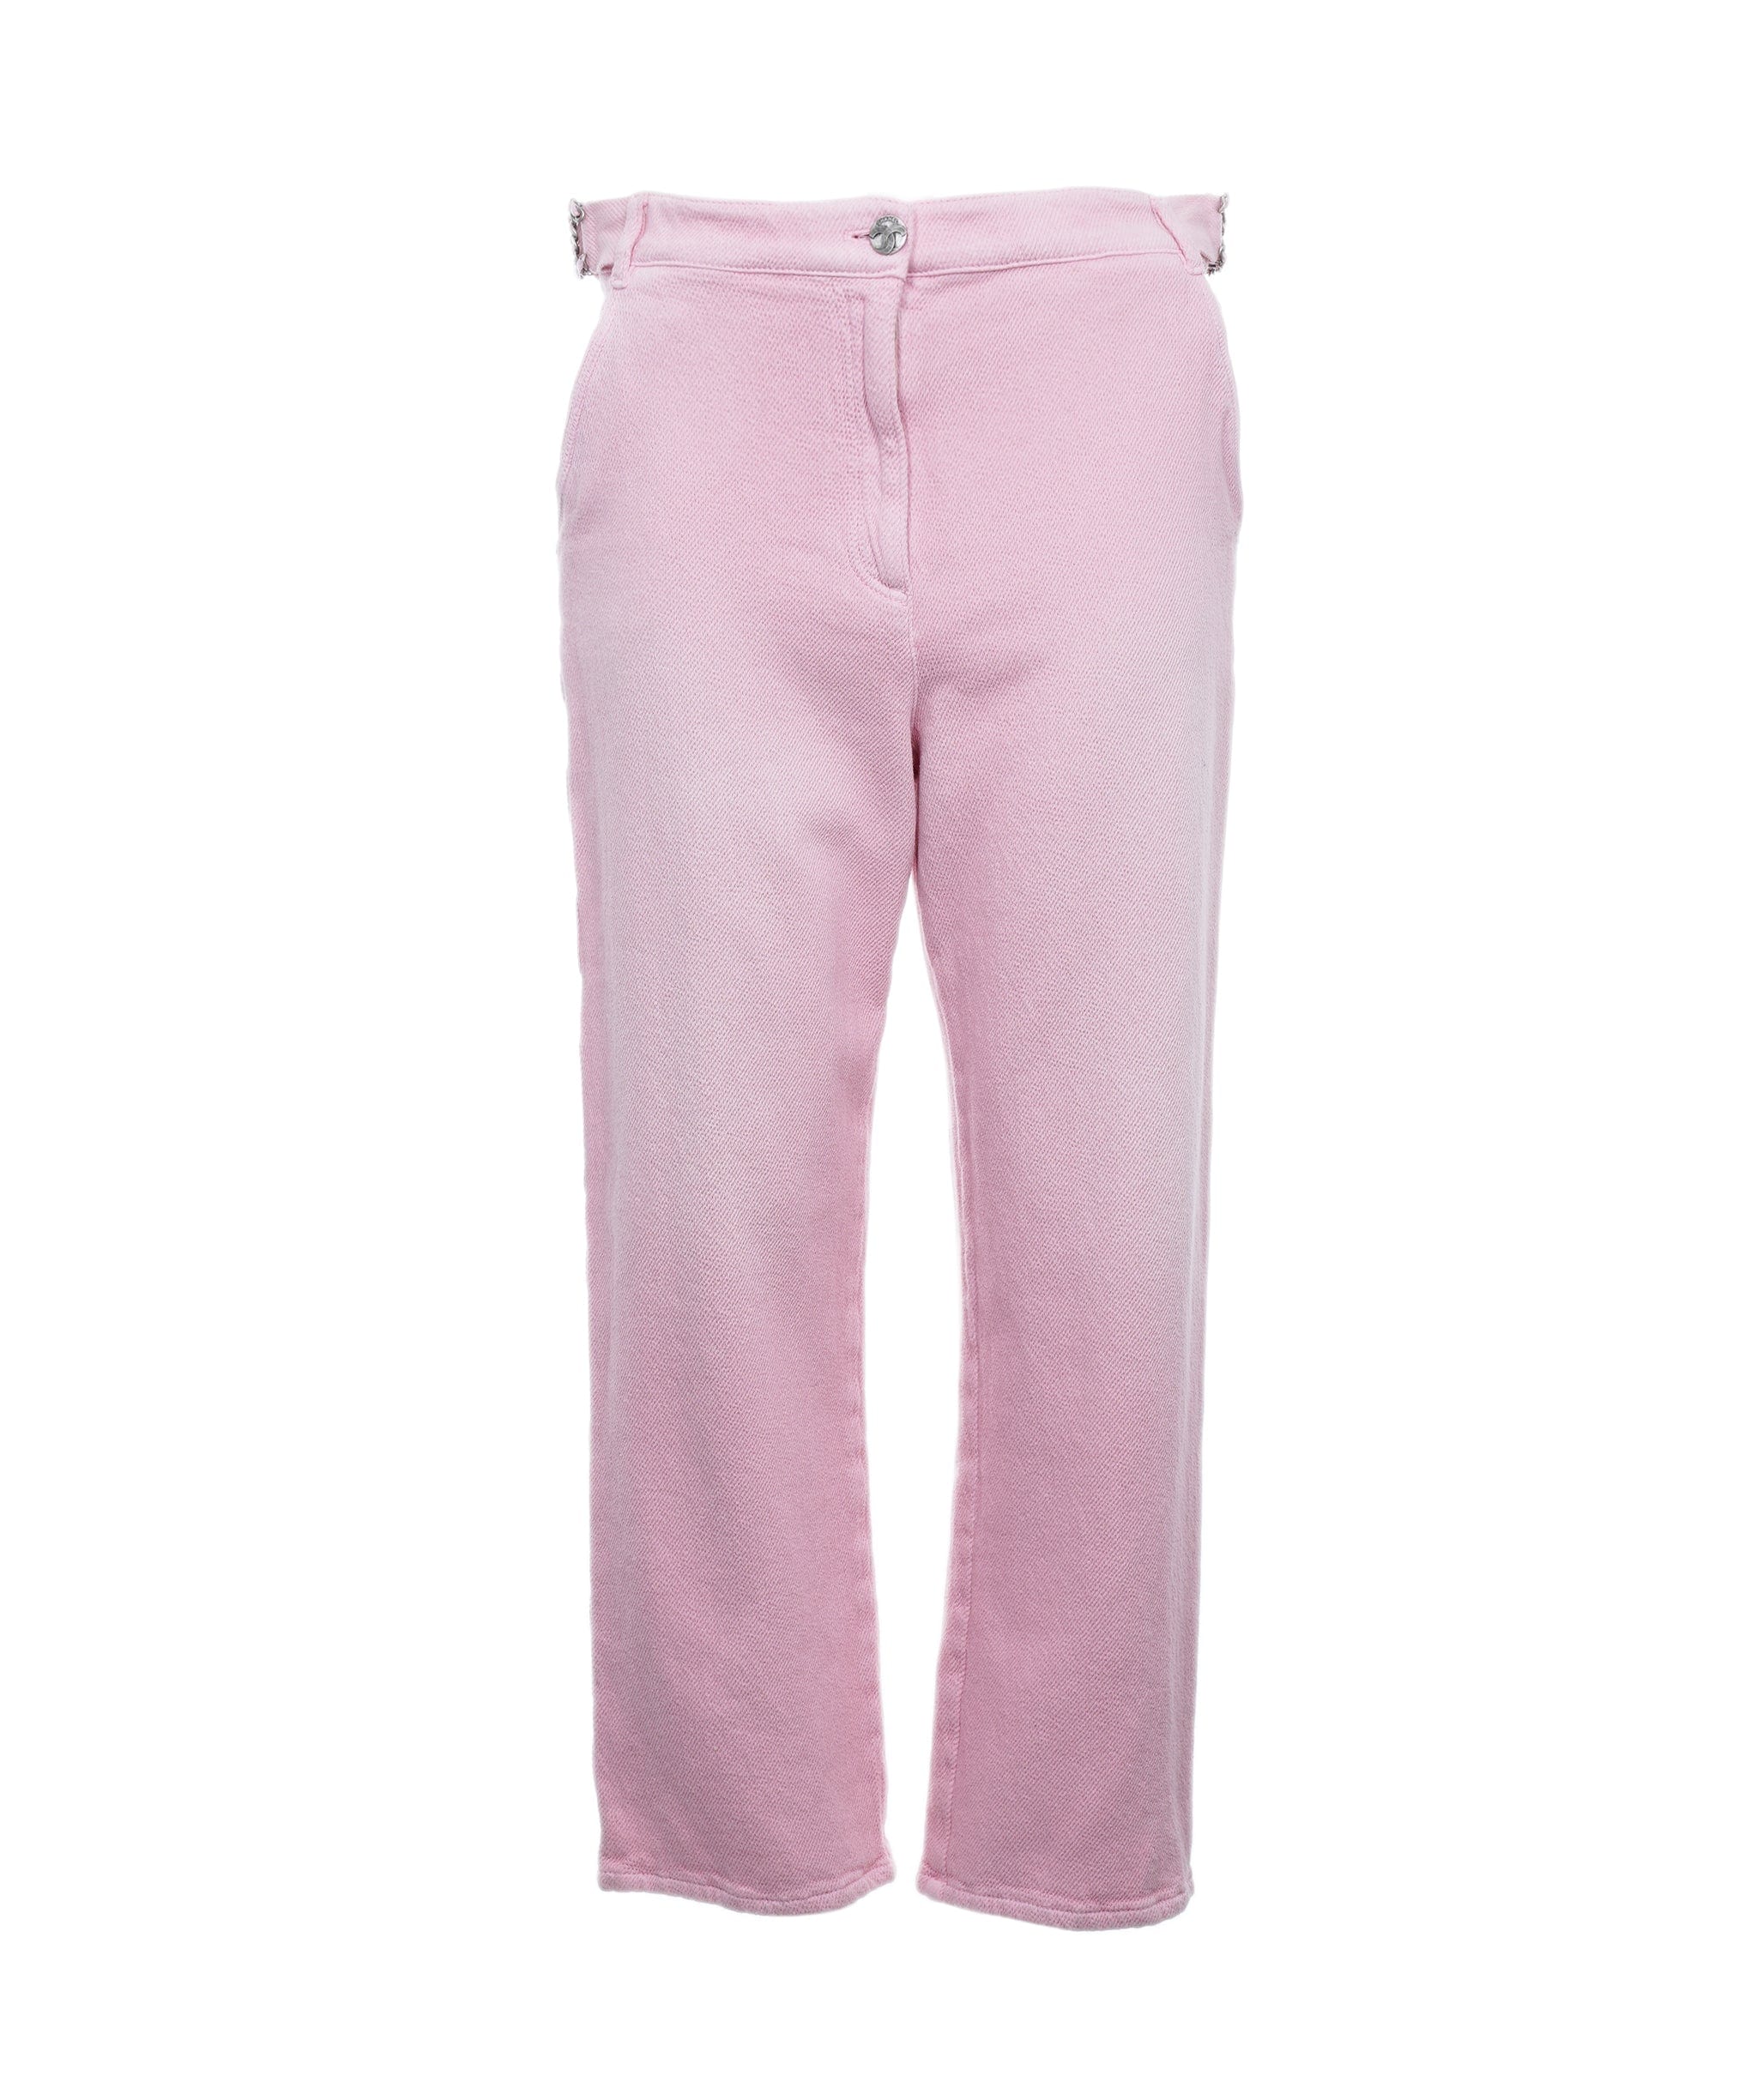 Chanel Chanel Pink S19 Jeans size 38 - AWC2223